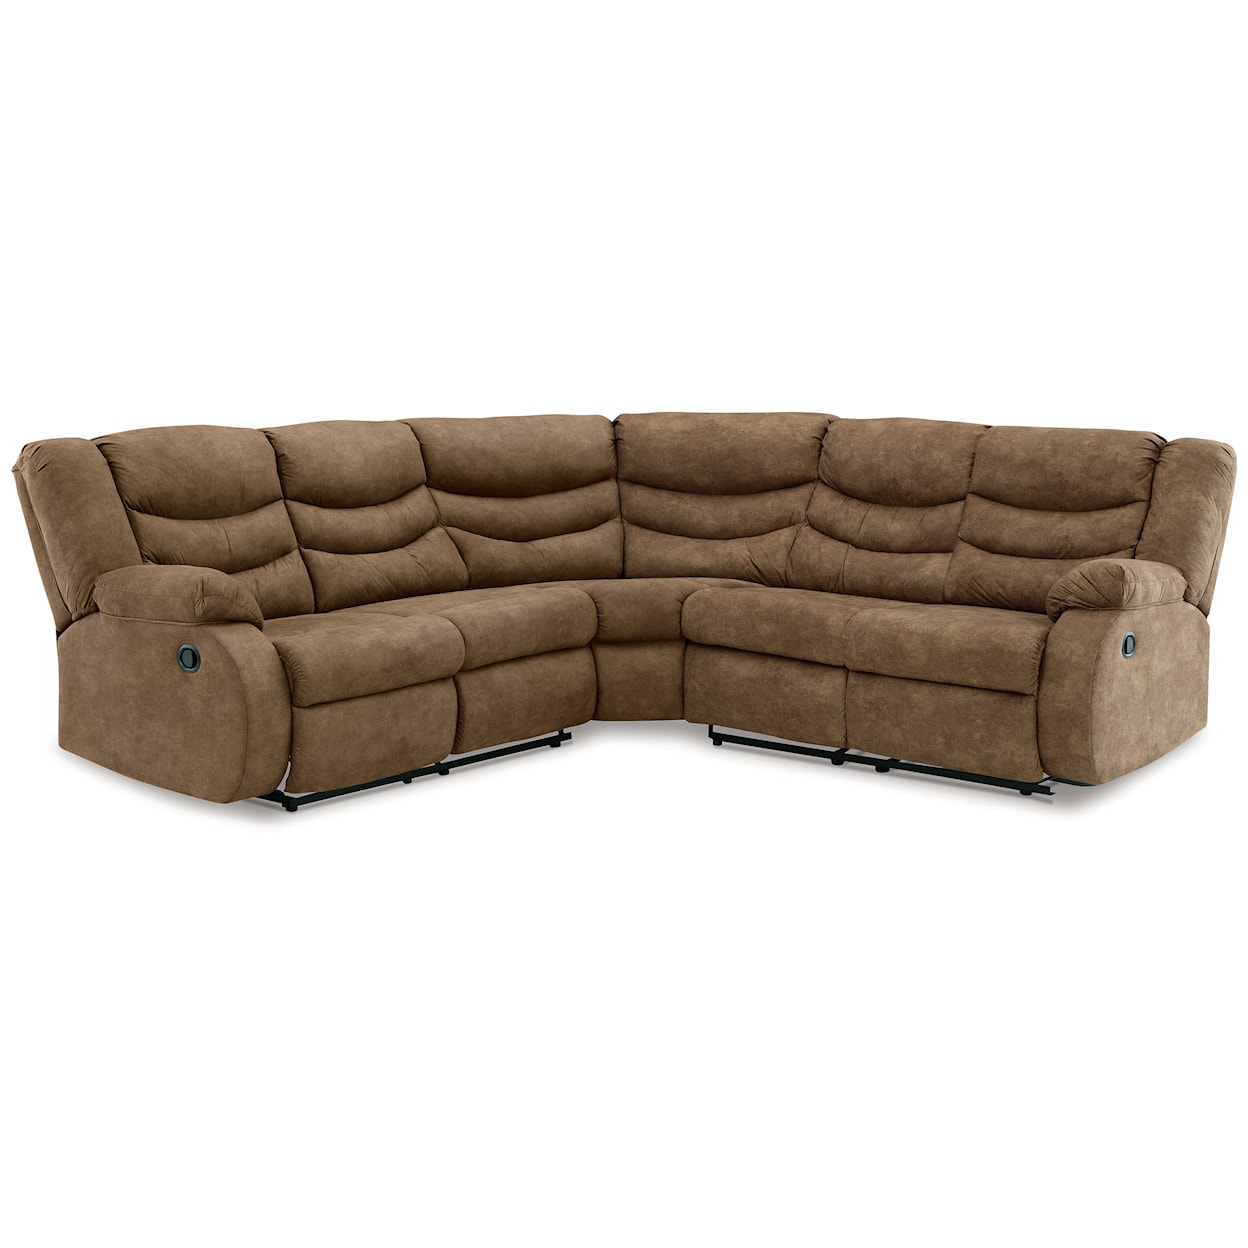 Signature Design by Ashley Partymate Reclining Sectional